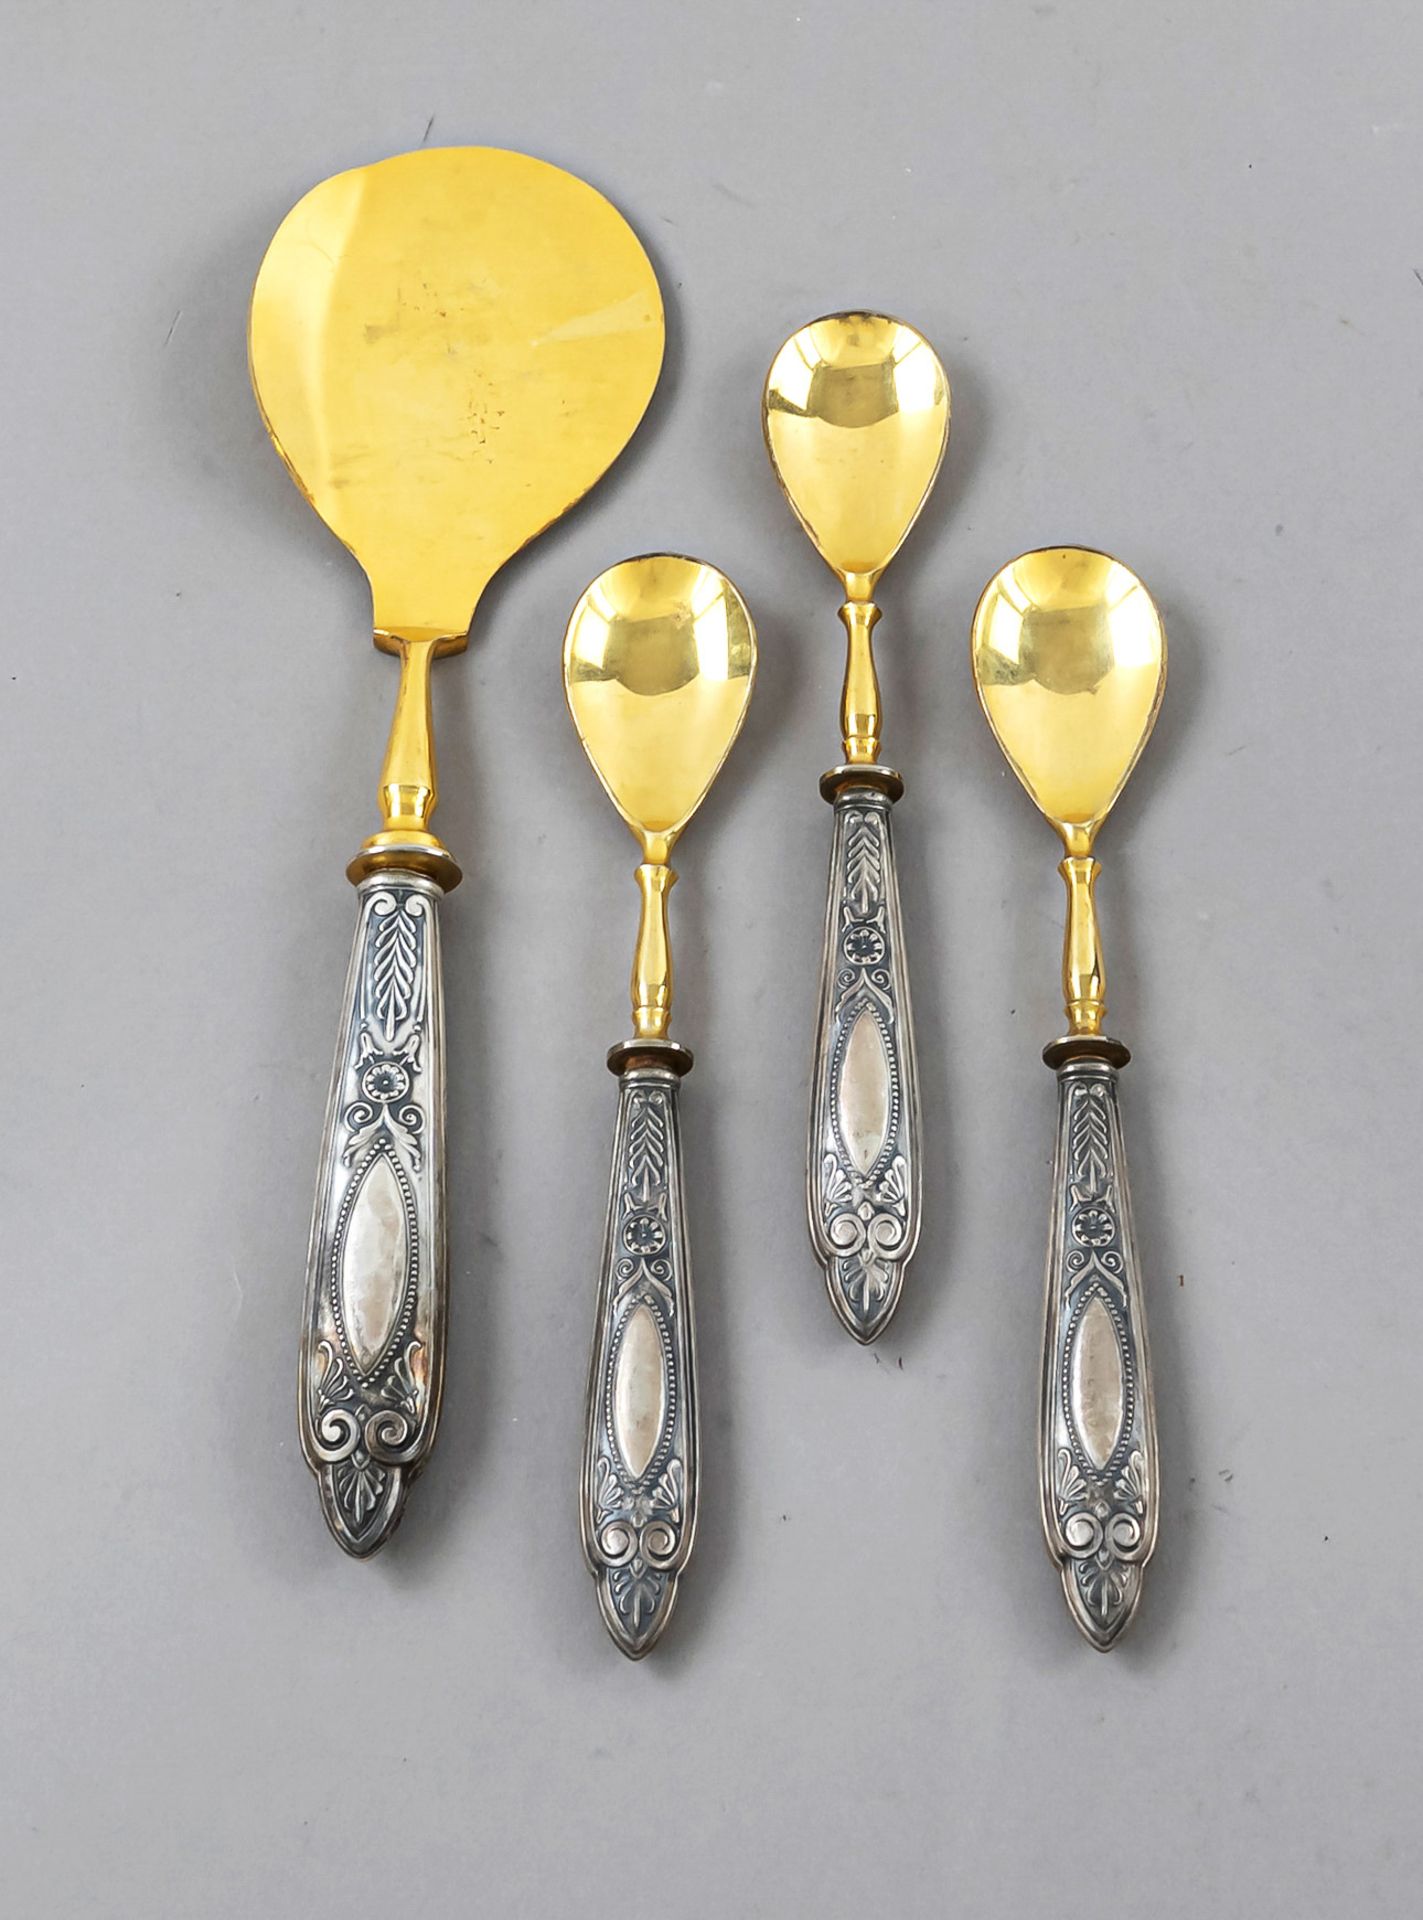 Ice cream cutlery for six persons, around 1900, silver tested, filled handles with ornamental relief